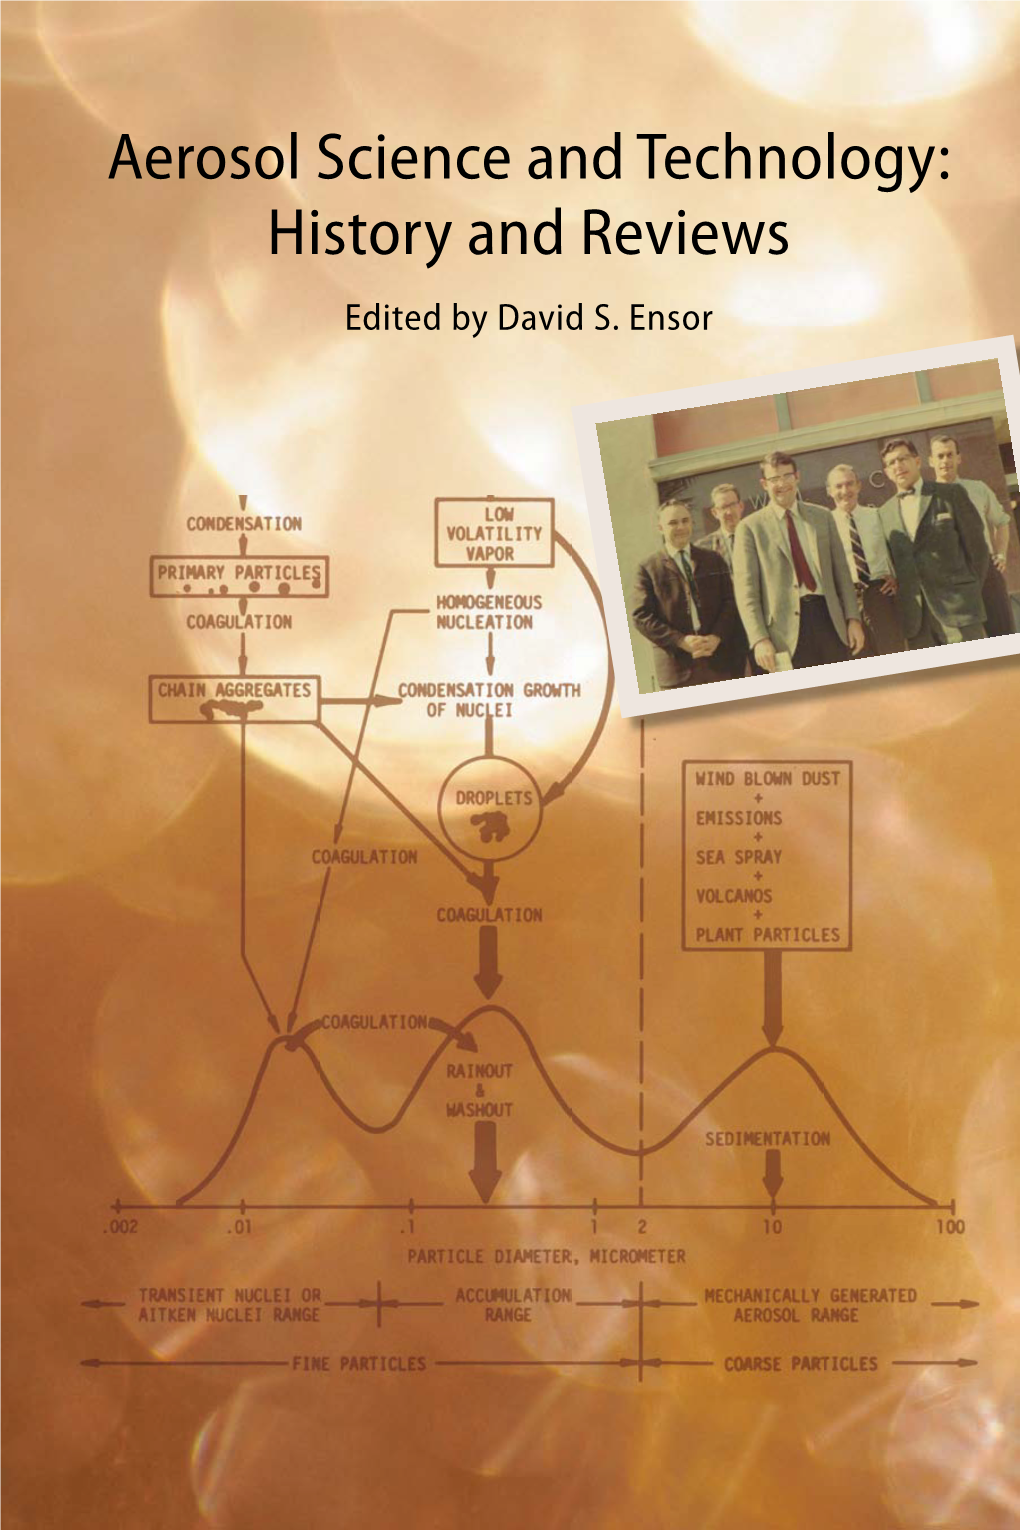 Aerosol Science and Technology: History and Reviews Edited by David S